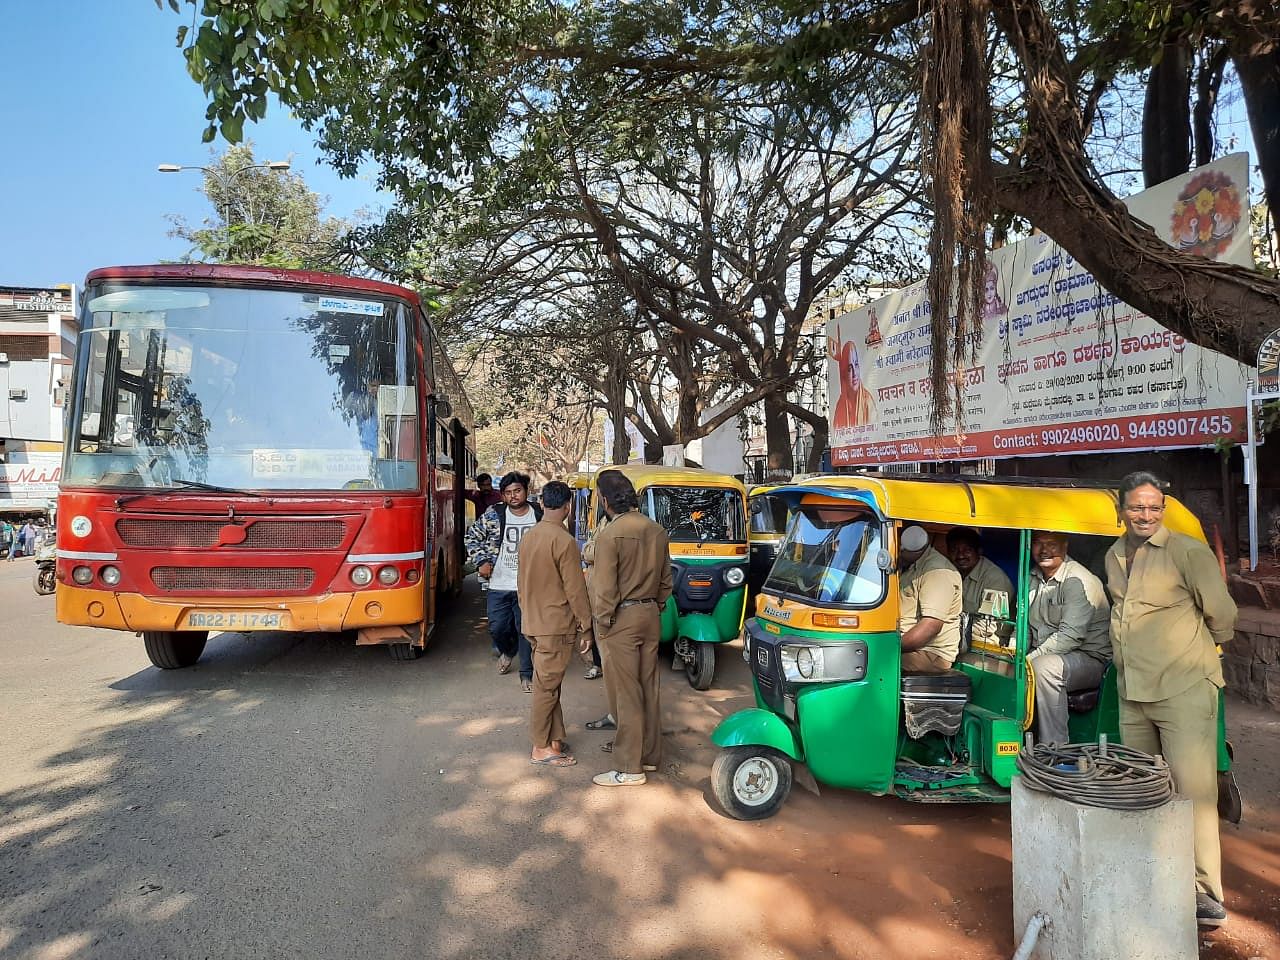 Apart from the public transport system that was plying normally, KSRTC buses, auto-rickshaws and other transport systems ran on the roads as per their routine. (DH Photo)